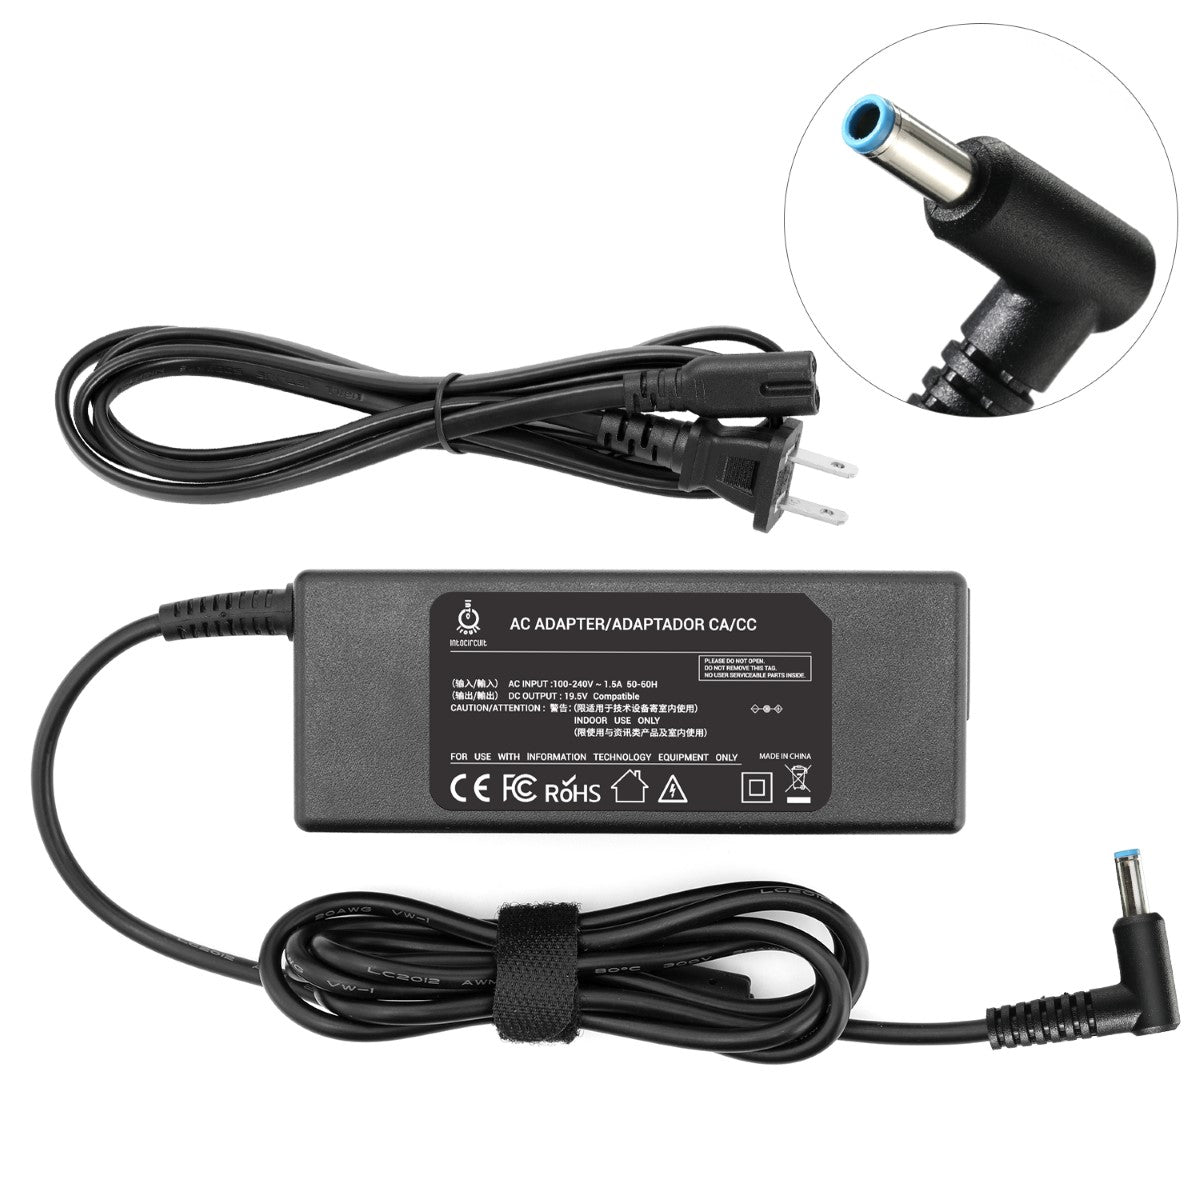 Charger for HP 14-bk052sa Laptop